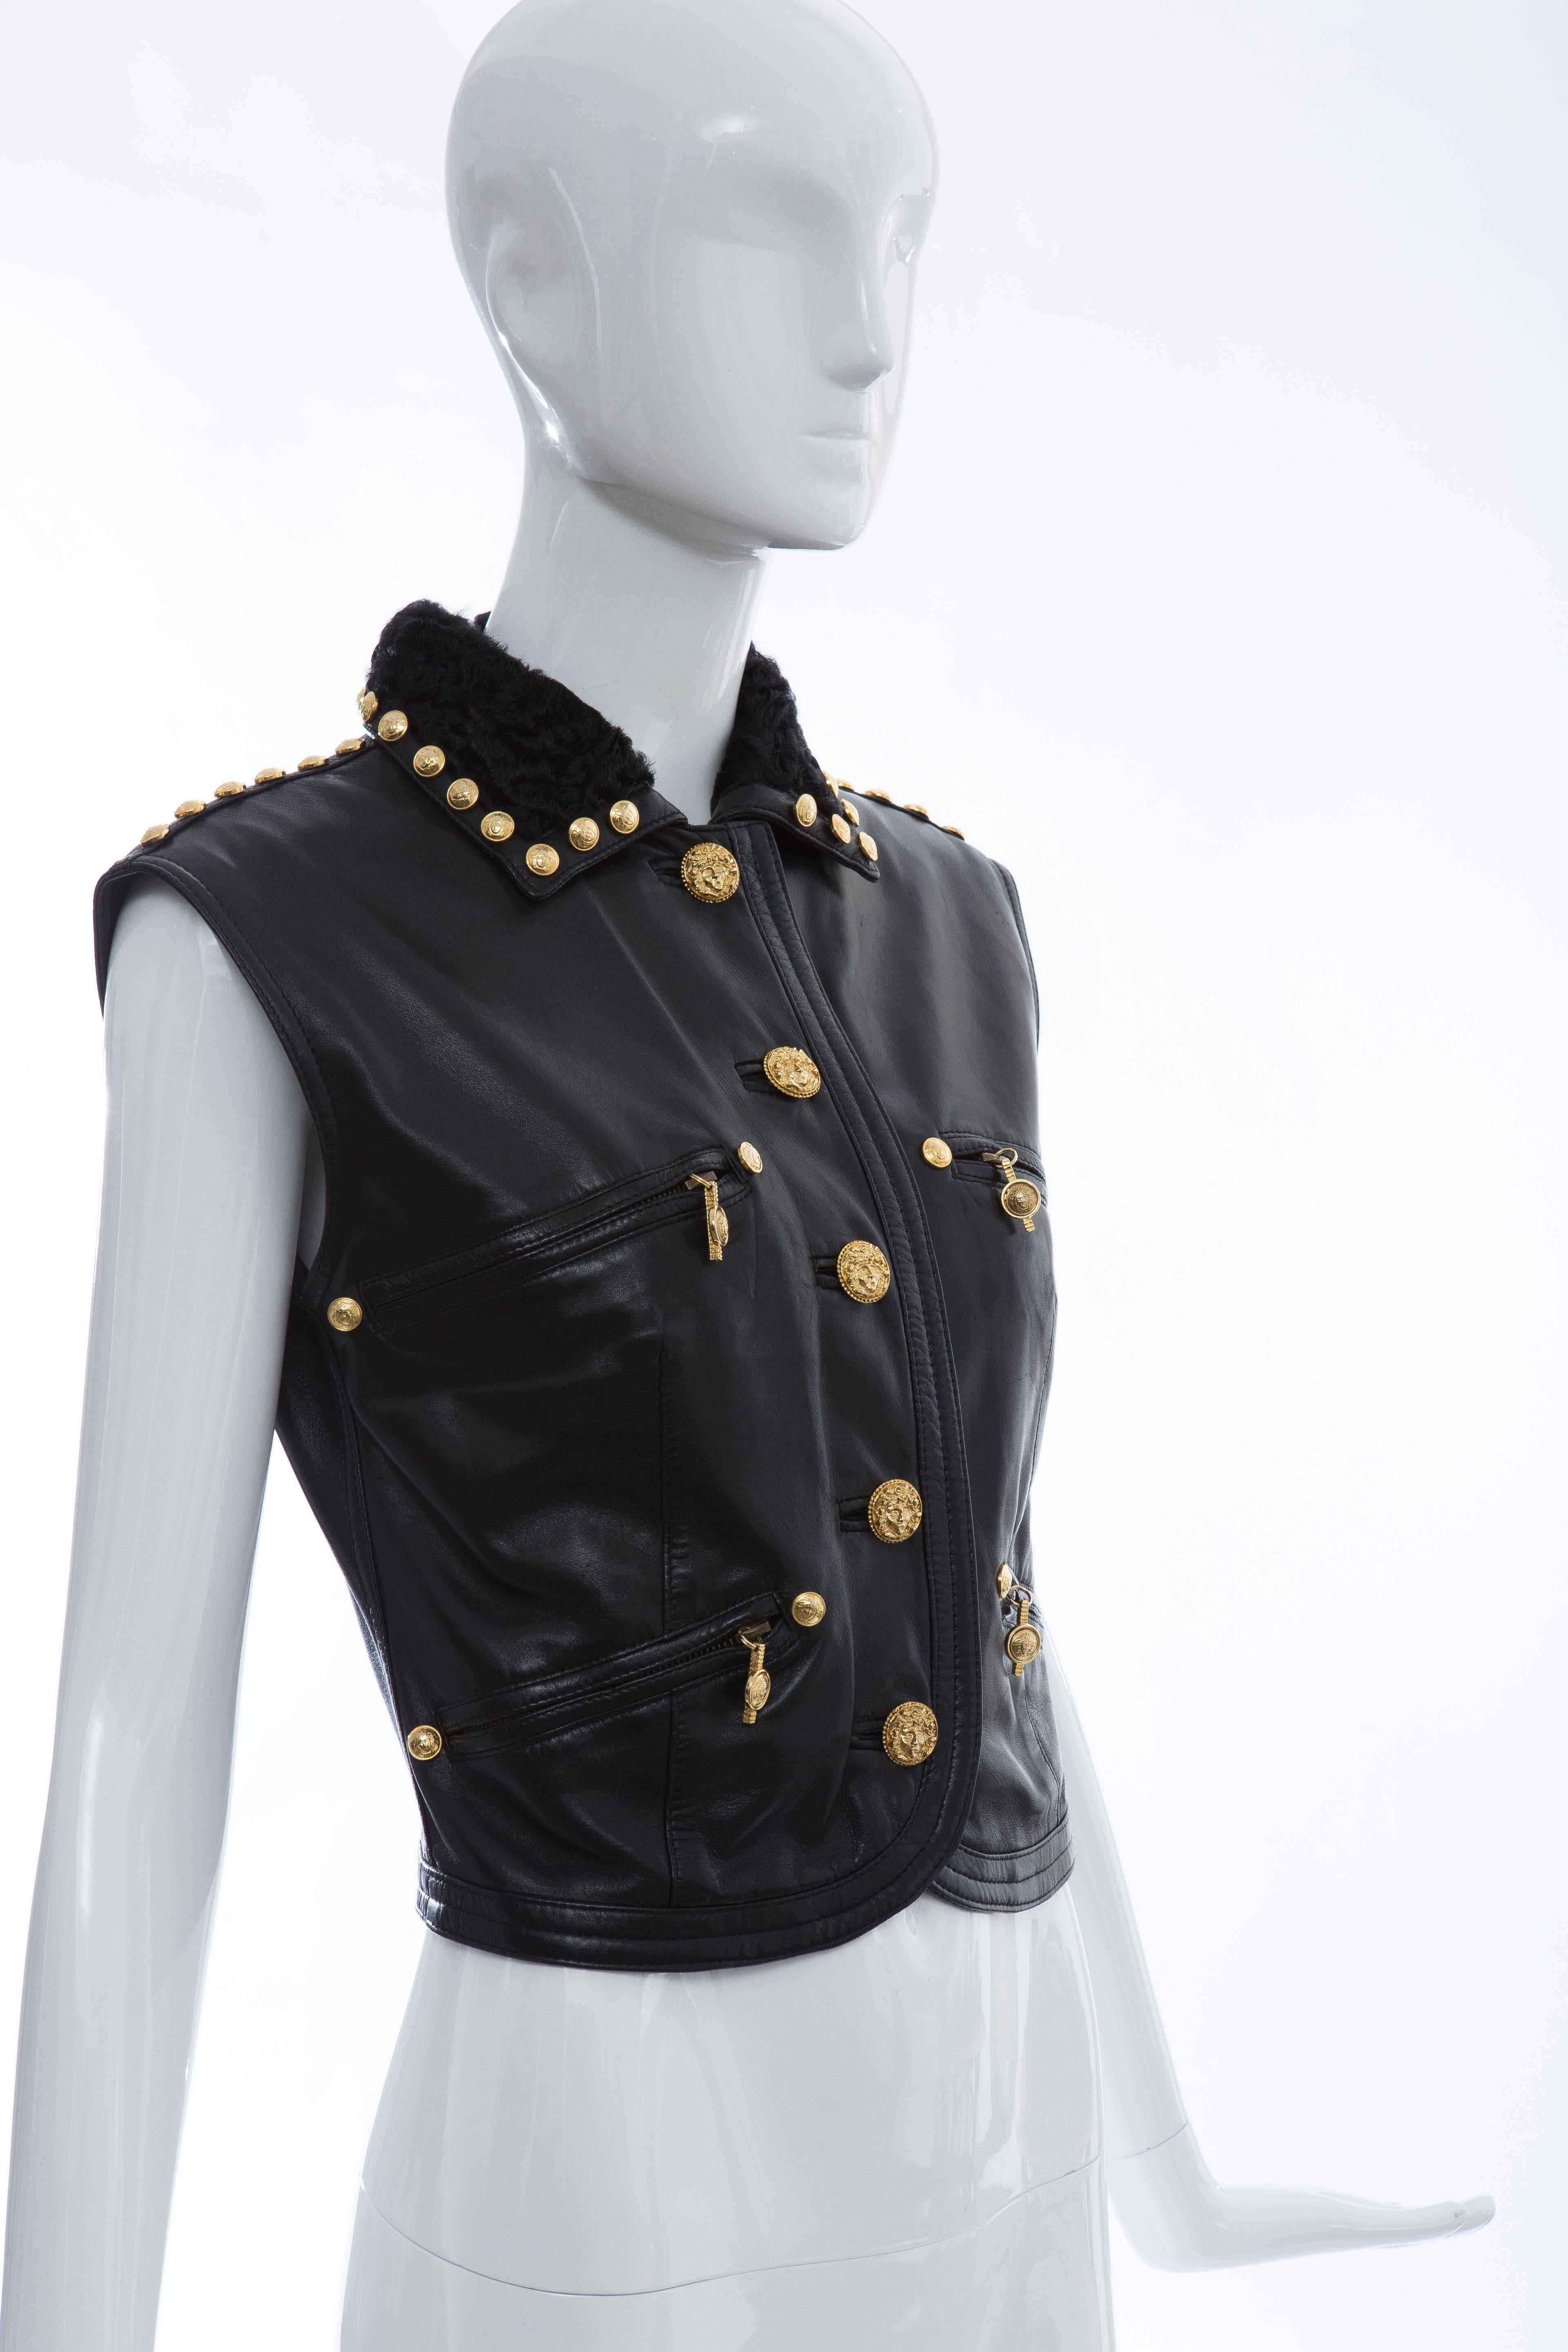 Gianni Versace Black Studded Leather Vest With Persian Lamb Collar, Circa 1990's 1